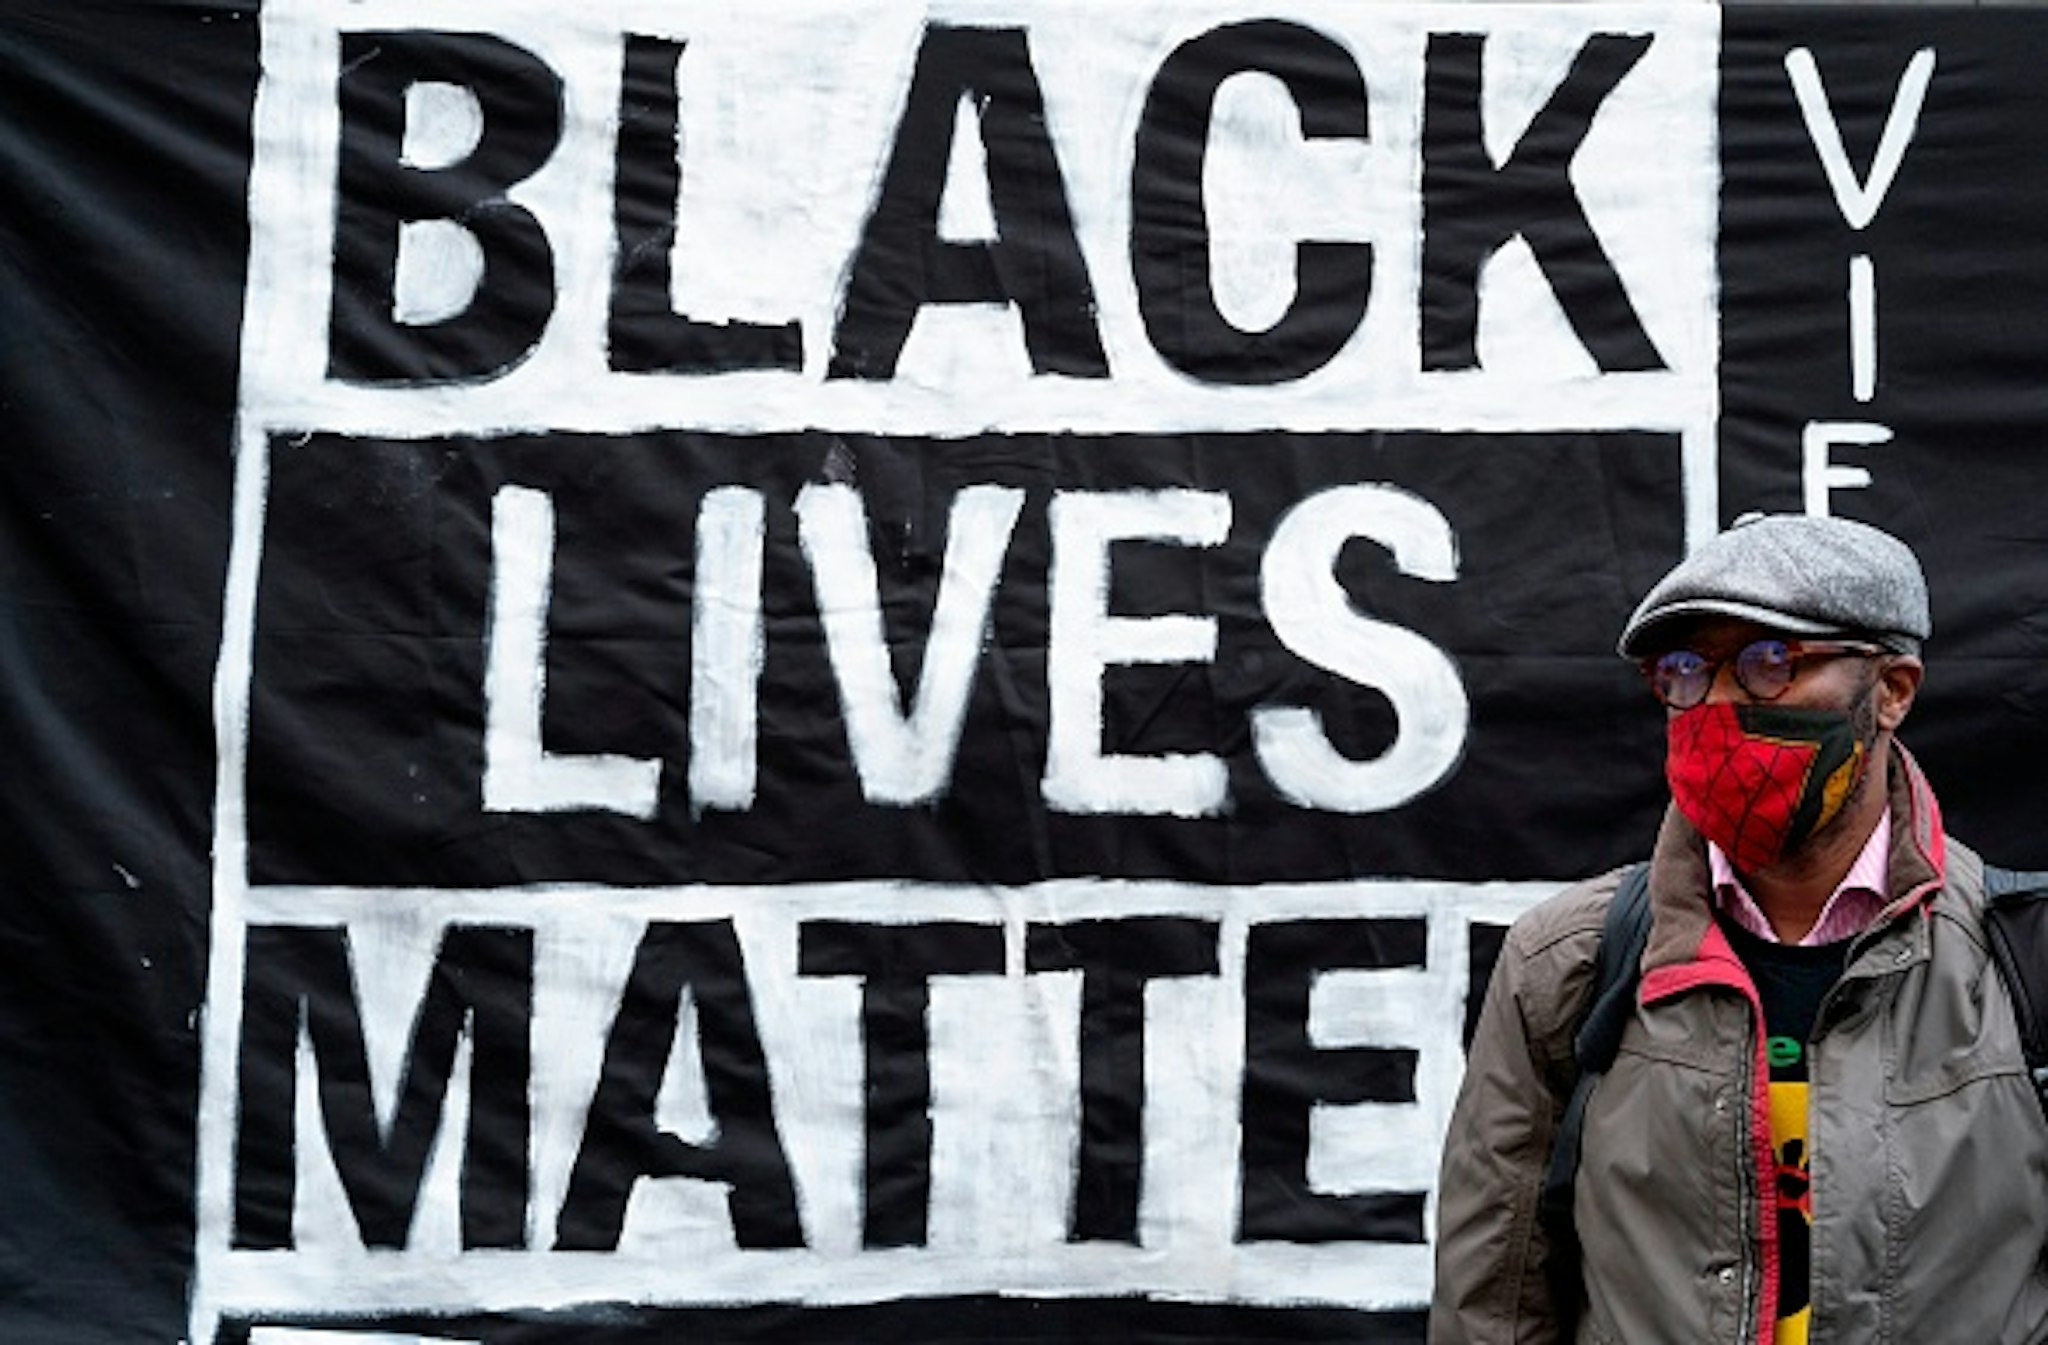 A protestor stands in front of a banner during a demonstration on June 5, 2020 outside the US embassy in Vienna, Austria, to show solidarity with the Black Lives Matter movement in the wake of the killing of George Floyd, an unarmed black man who died after a police officer knelt on his neck in Minneapolis. - Hundreds of mourners joined an emotional memorial service in Minneapolis for George Floyd, the black man killed by police last week.The police killing of George Floyd led to diverse protests calling for an end to violence towards African Americans, whom studies have found face an elevated risk of dying at the hands of law enforcement